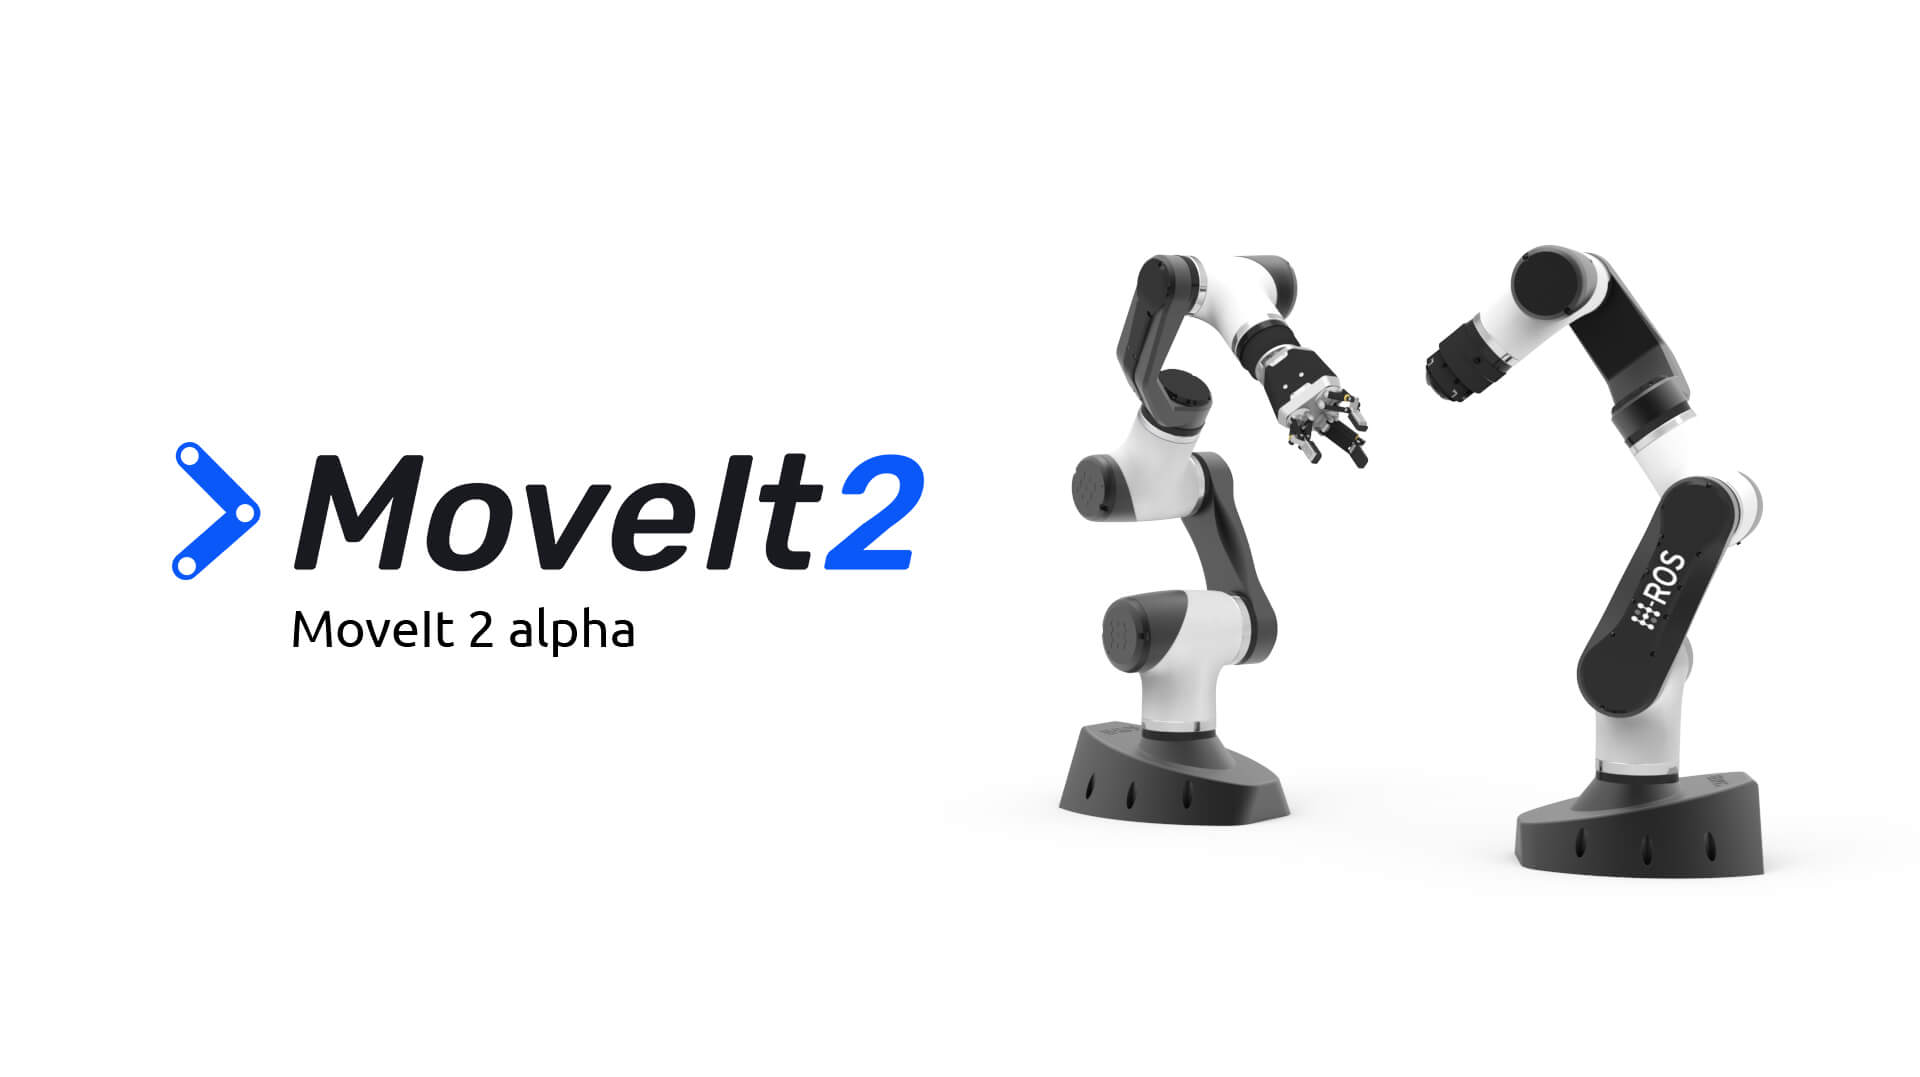 Announcing MoveIt 2 Alpha Release